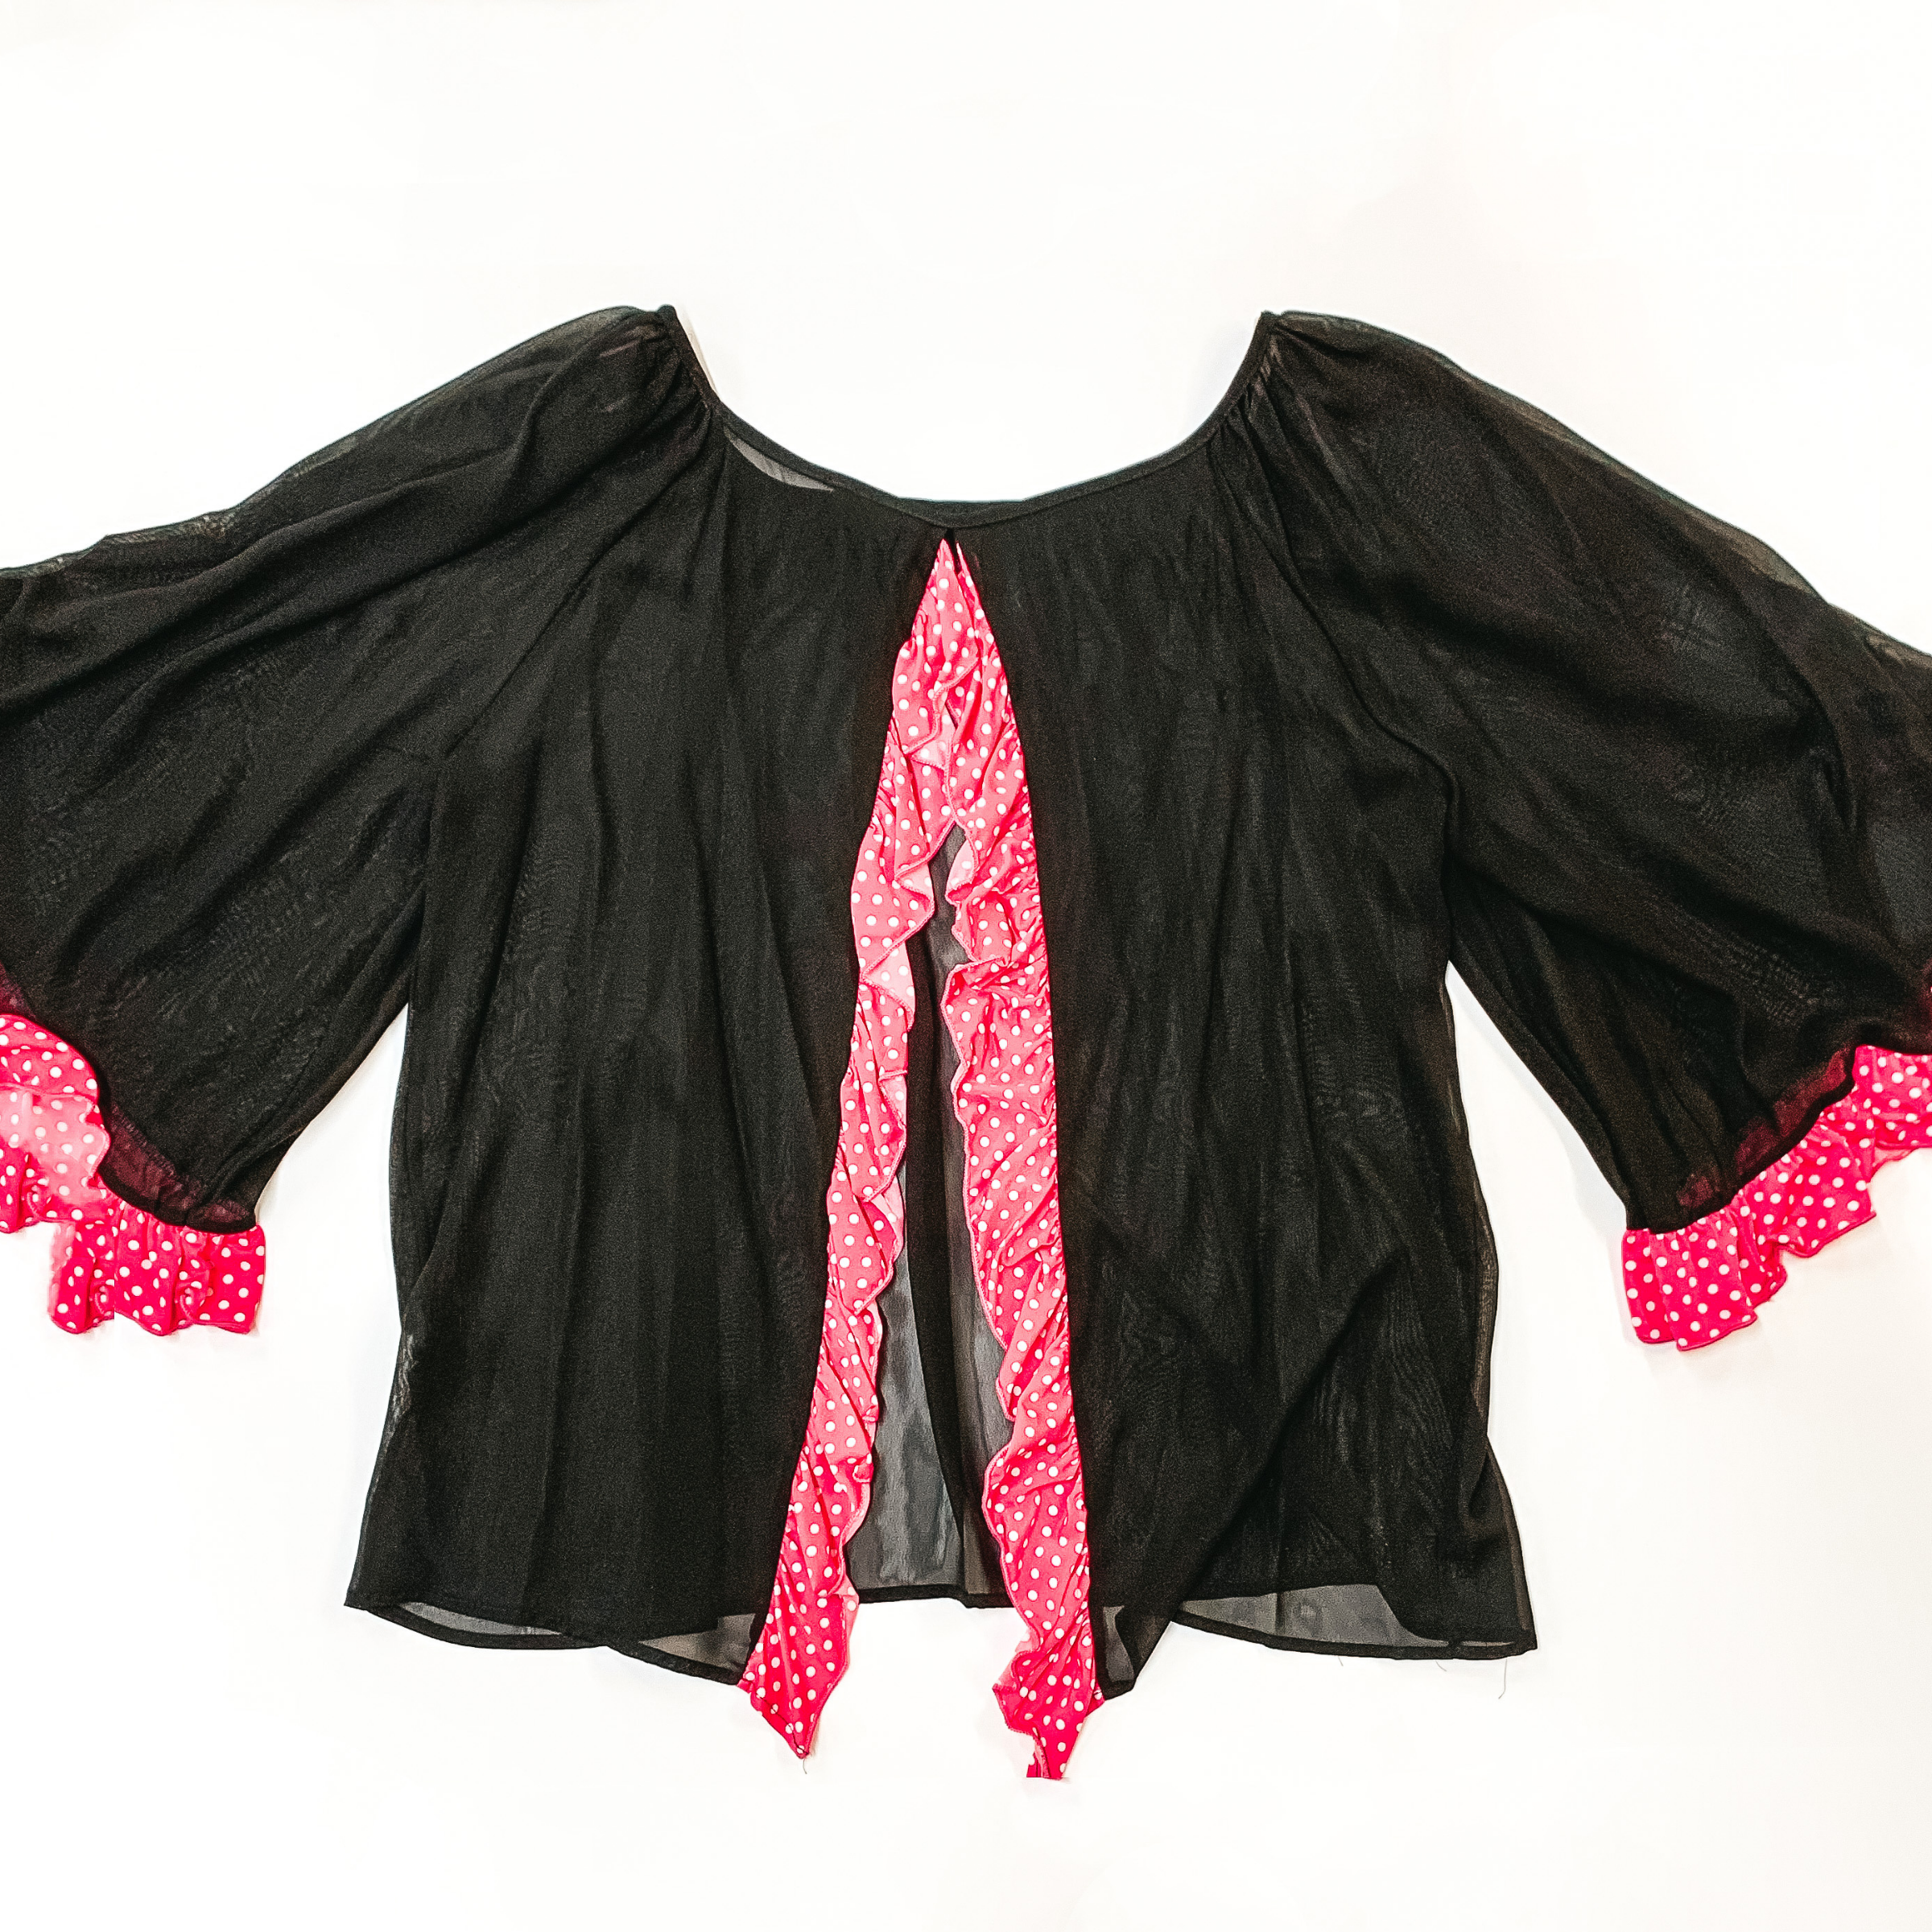 Last Chance Size 3XL | Sheer Open Back Blouse with Pink Dotted Ruffle Hemlines in Black - Giddy Up Glamour Boutique